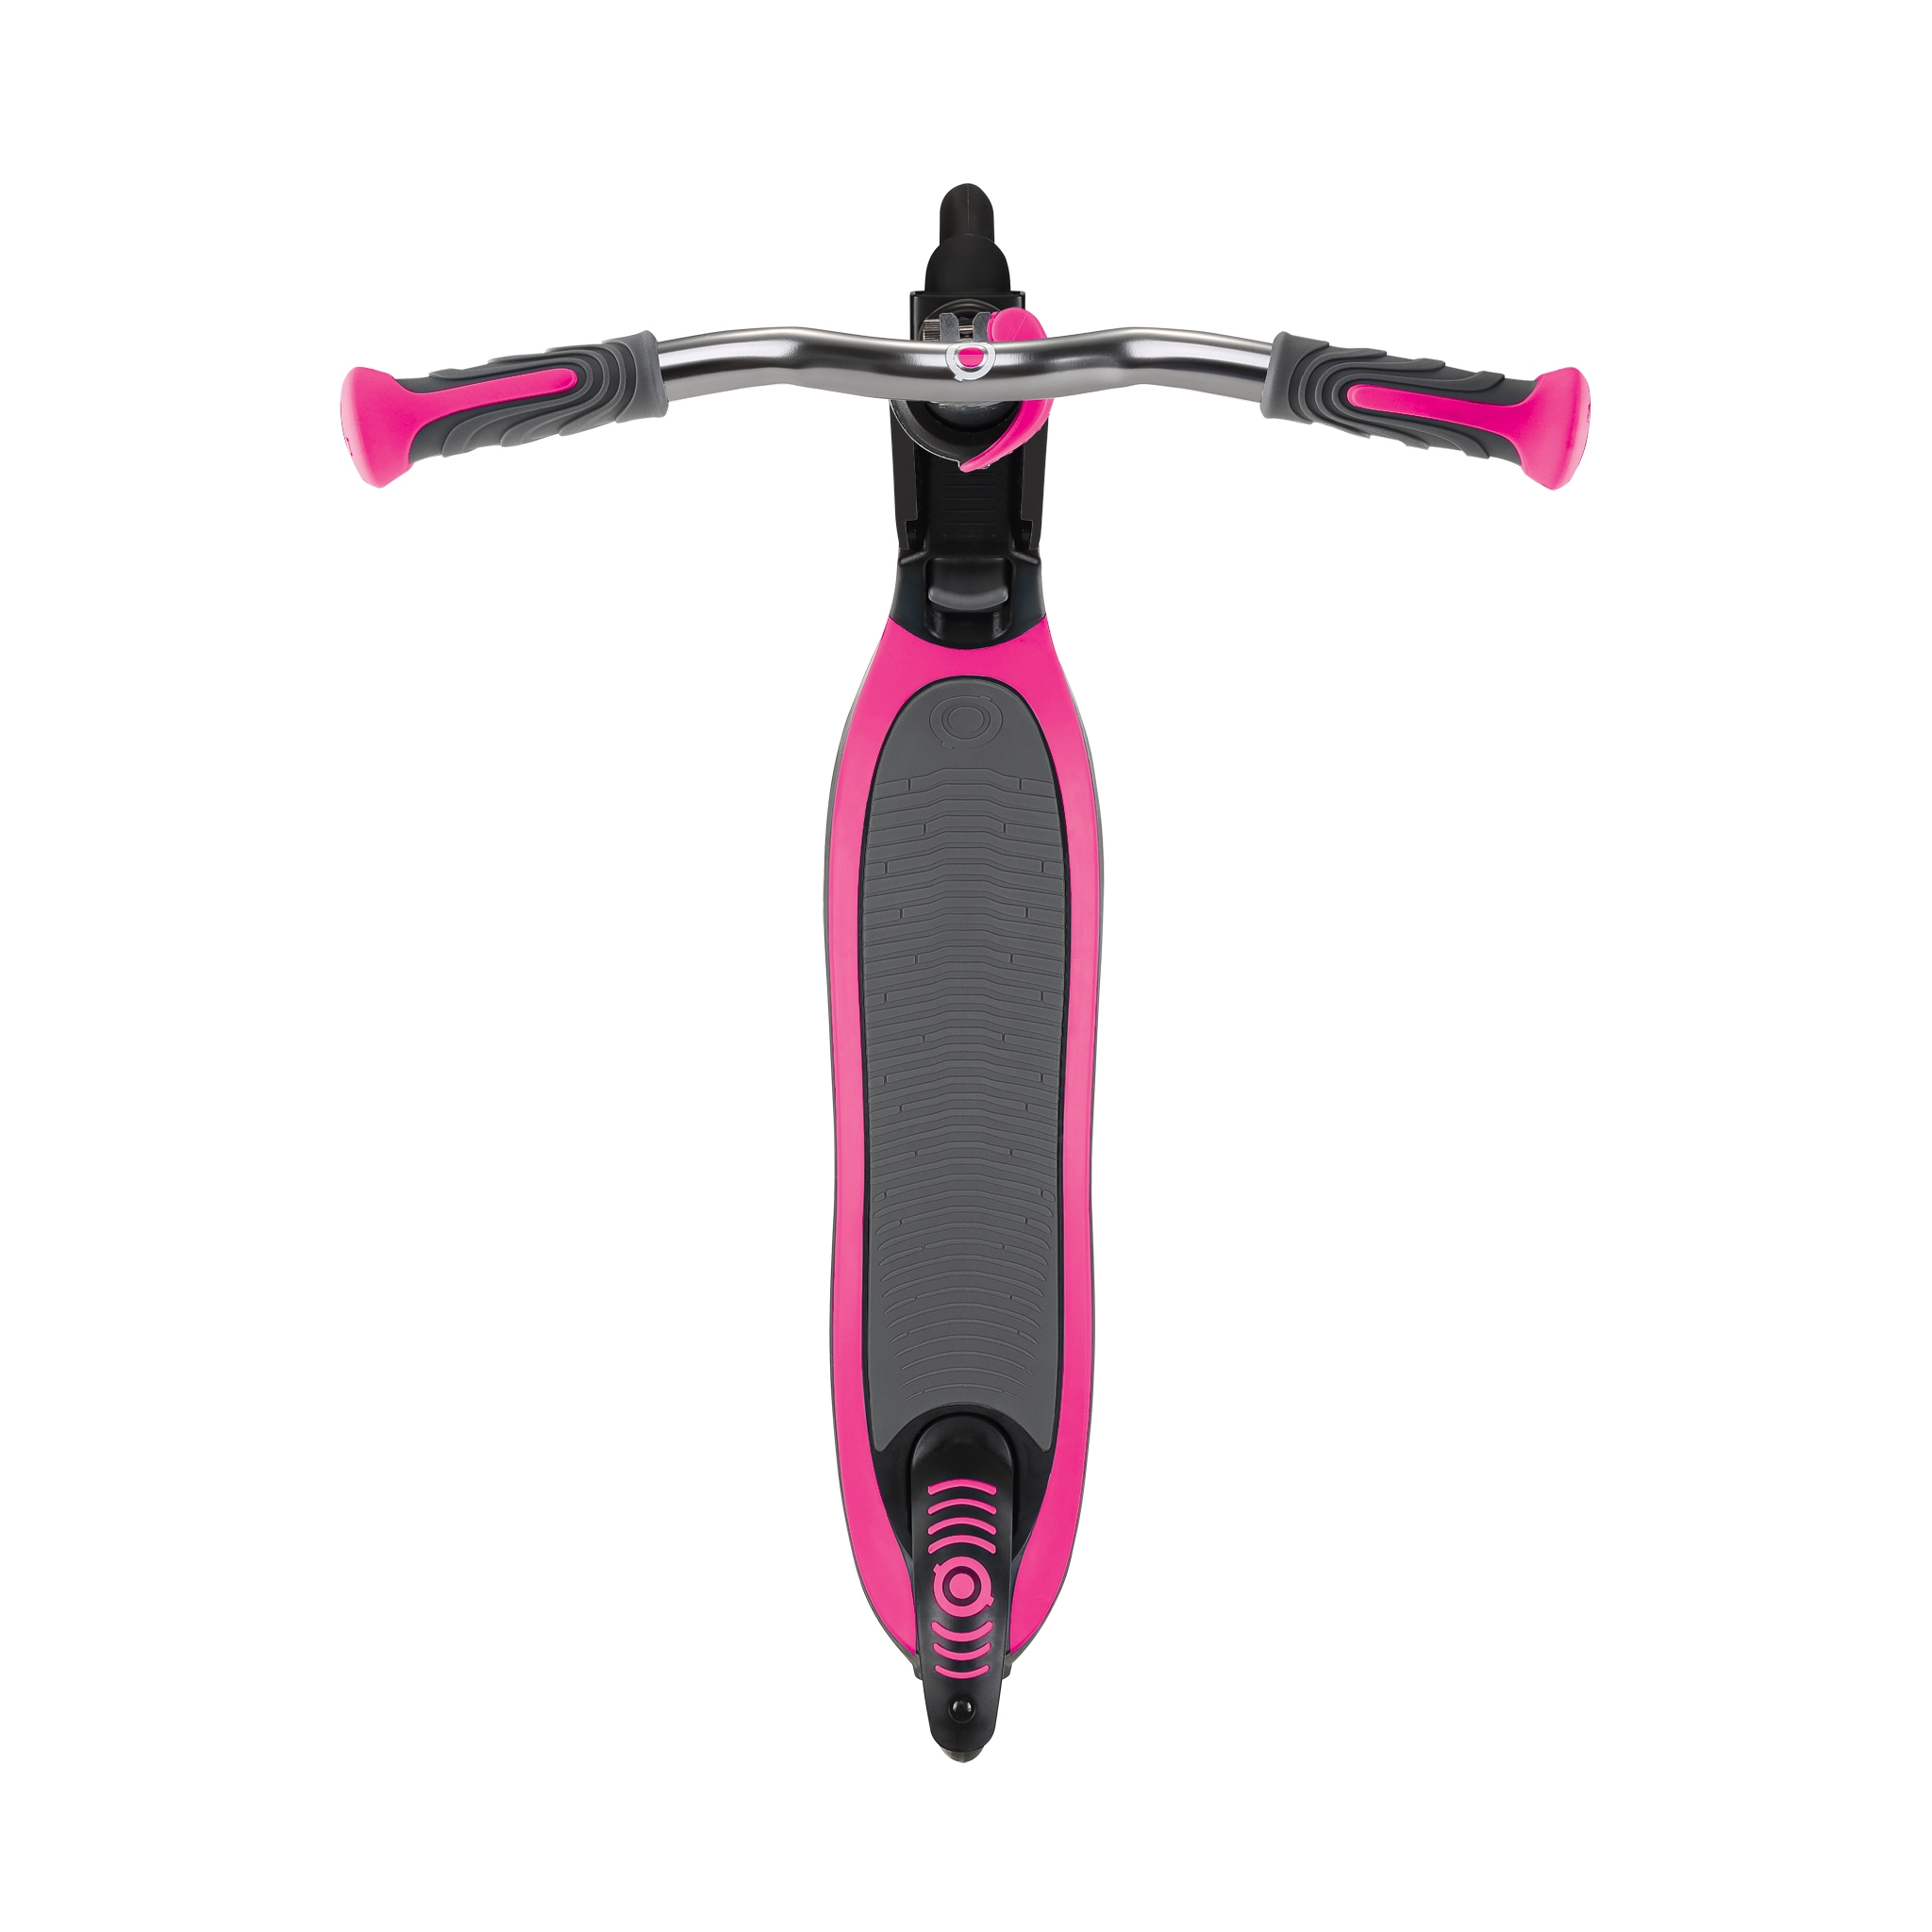 FLOW-FOLDABLE-125-2-wheel-scooter-with-triple-deck-structure-deep-pink 5